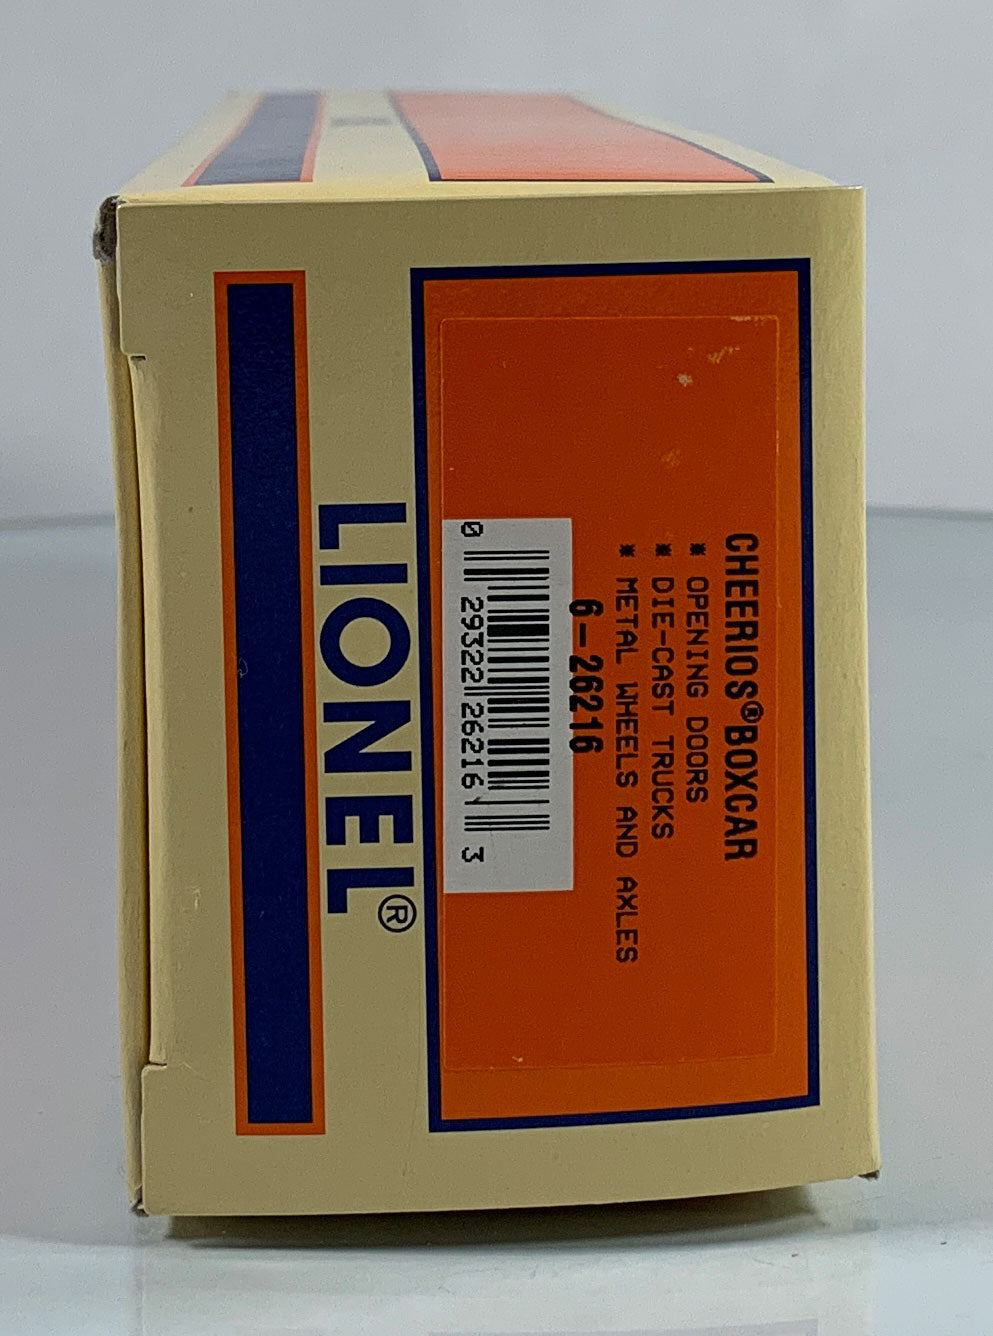 LIONEL • O GAUGE • 1998 Cheerios Boxcar  6-26216 • NEW OLD STOCK